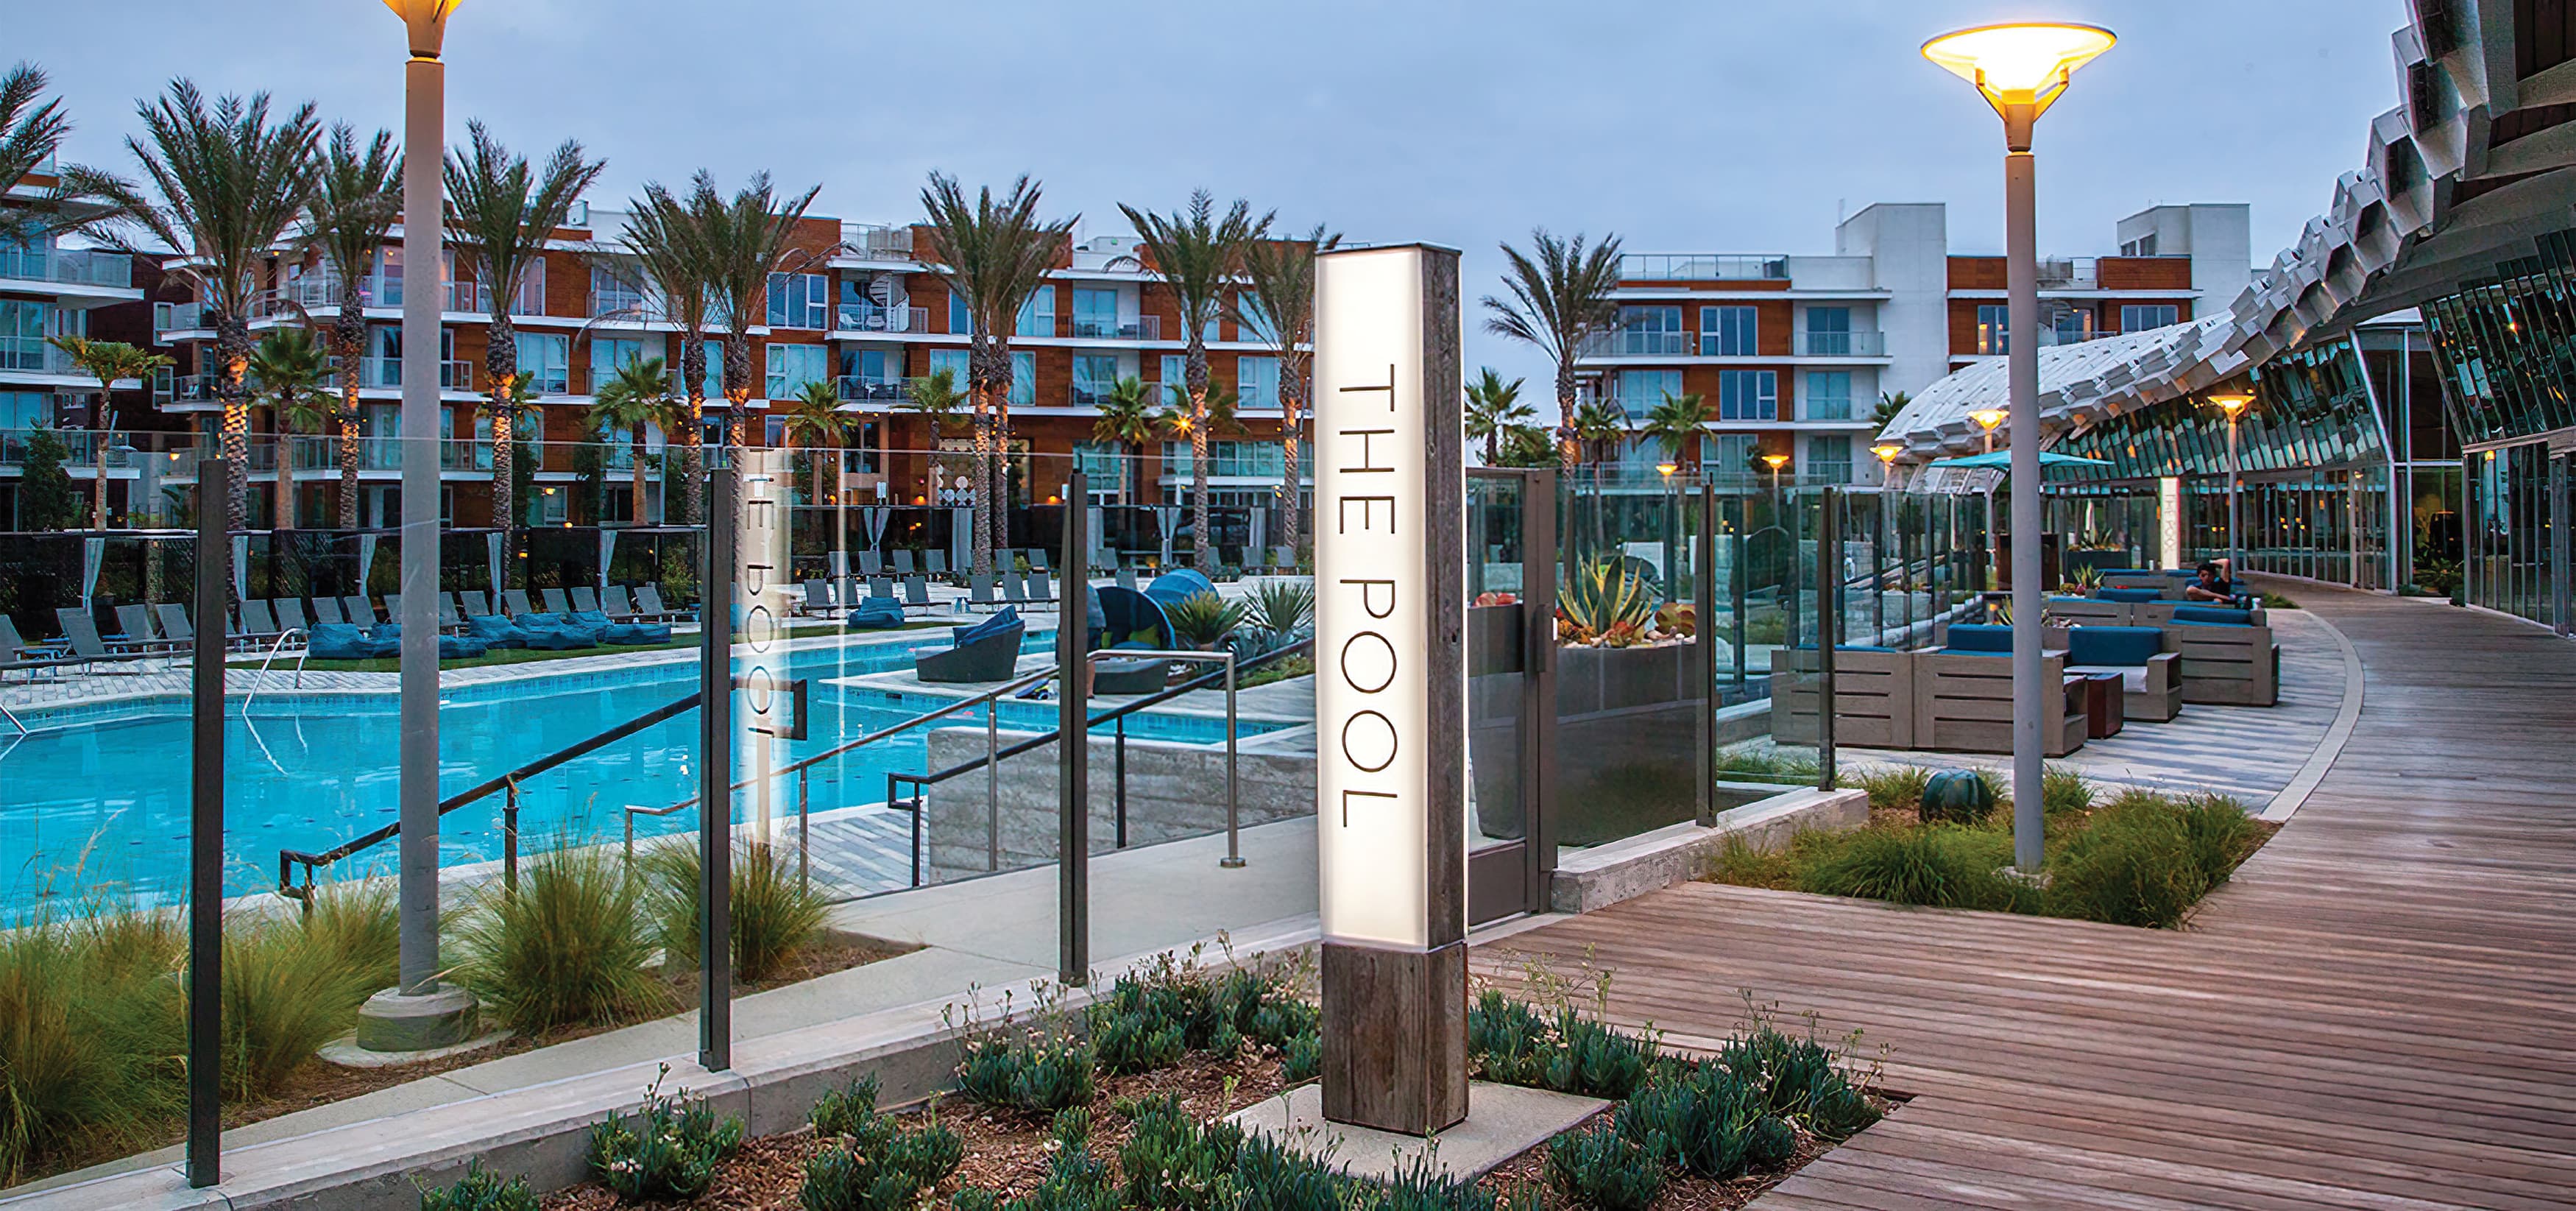 Pacific City, a luxury residential community in Huntington Beach, California. Amenity Identity Signage.